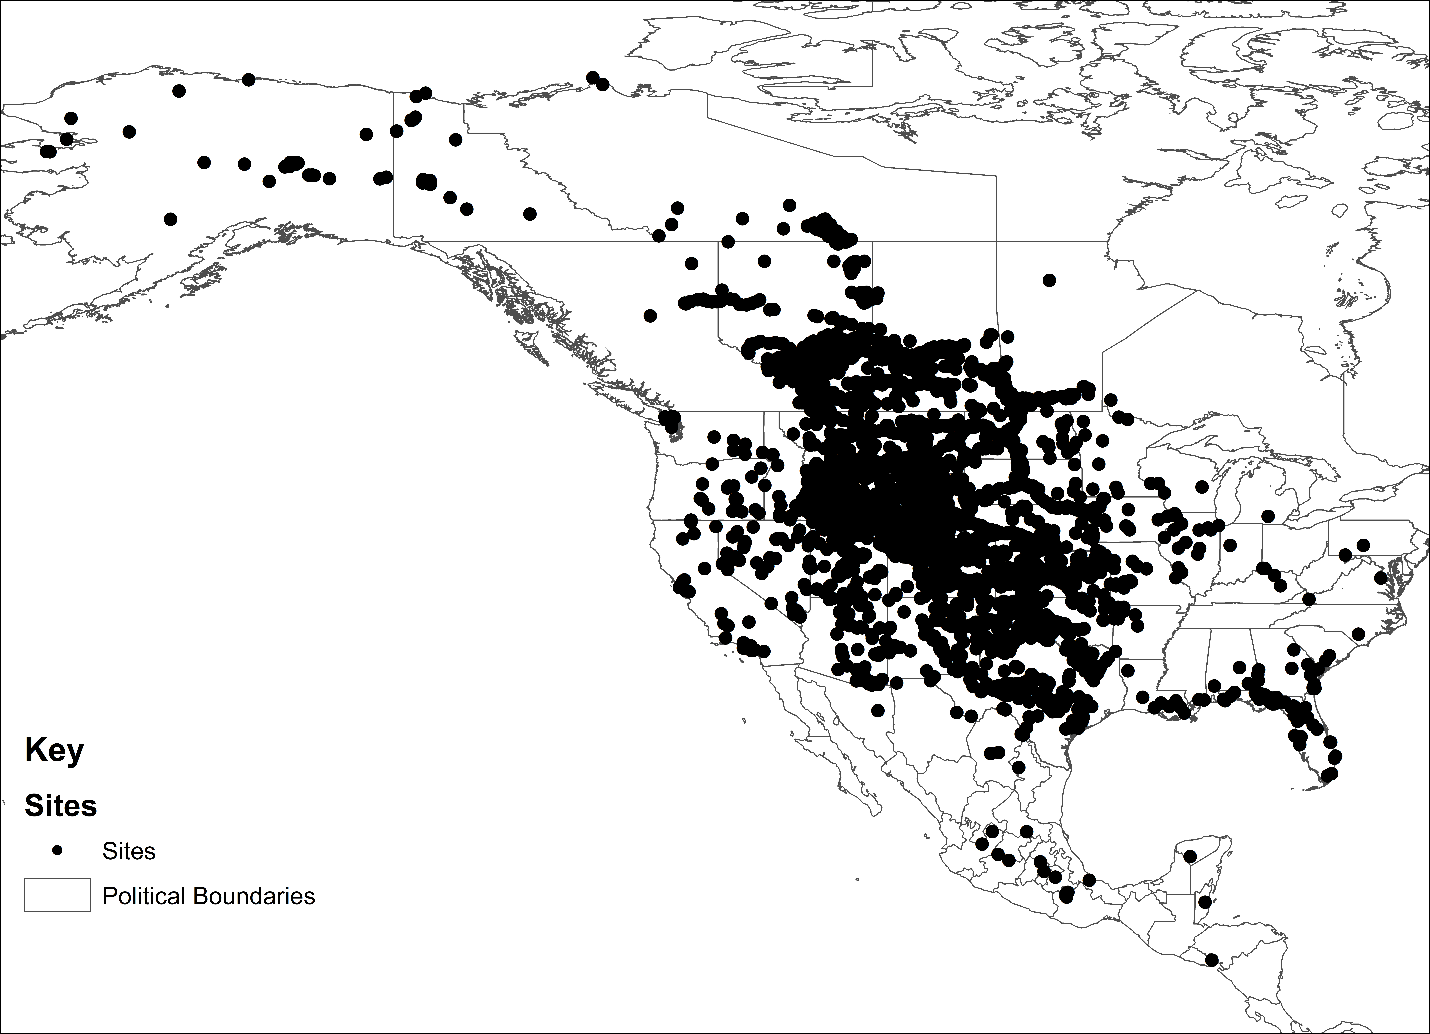 Map indicating the historic and prehistoric distribution range of North American bison (Bison bison) across Canada, United States, Mexico, Belize and El Salvador over the last 40,000 years. For a detailed description, call SDSU Extension at 605-688-6729